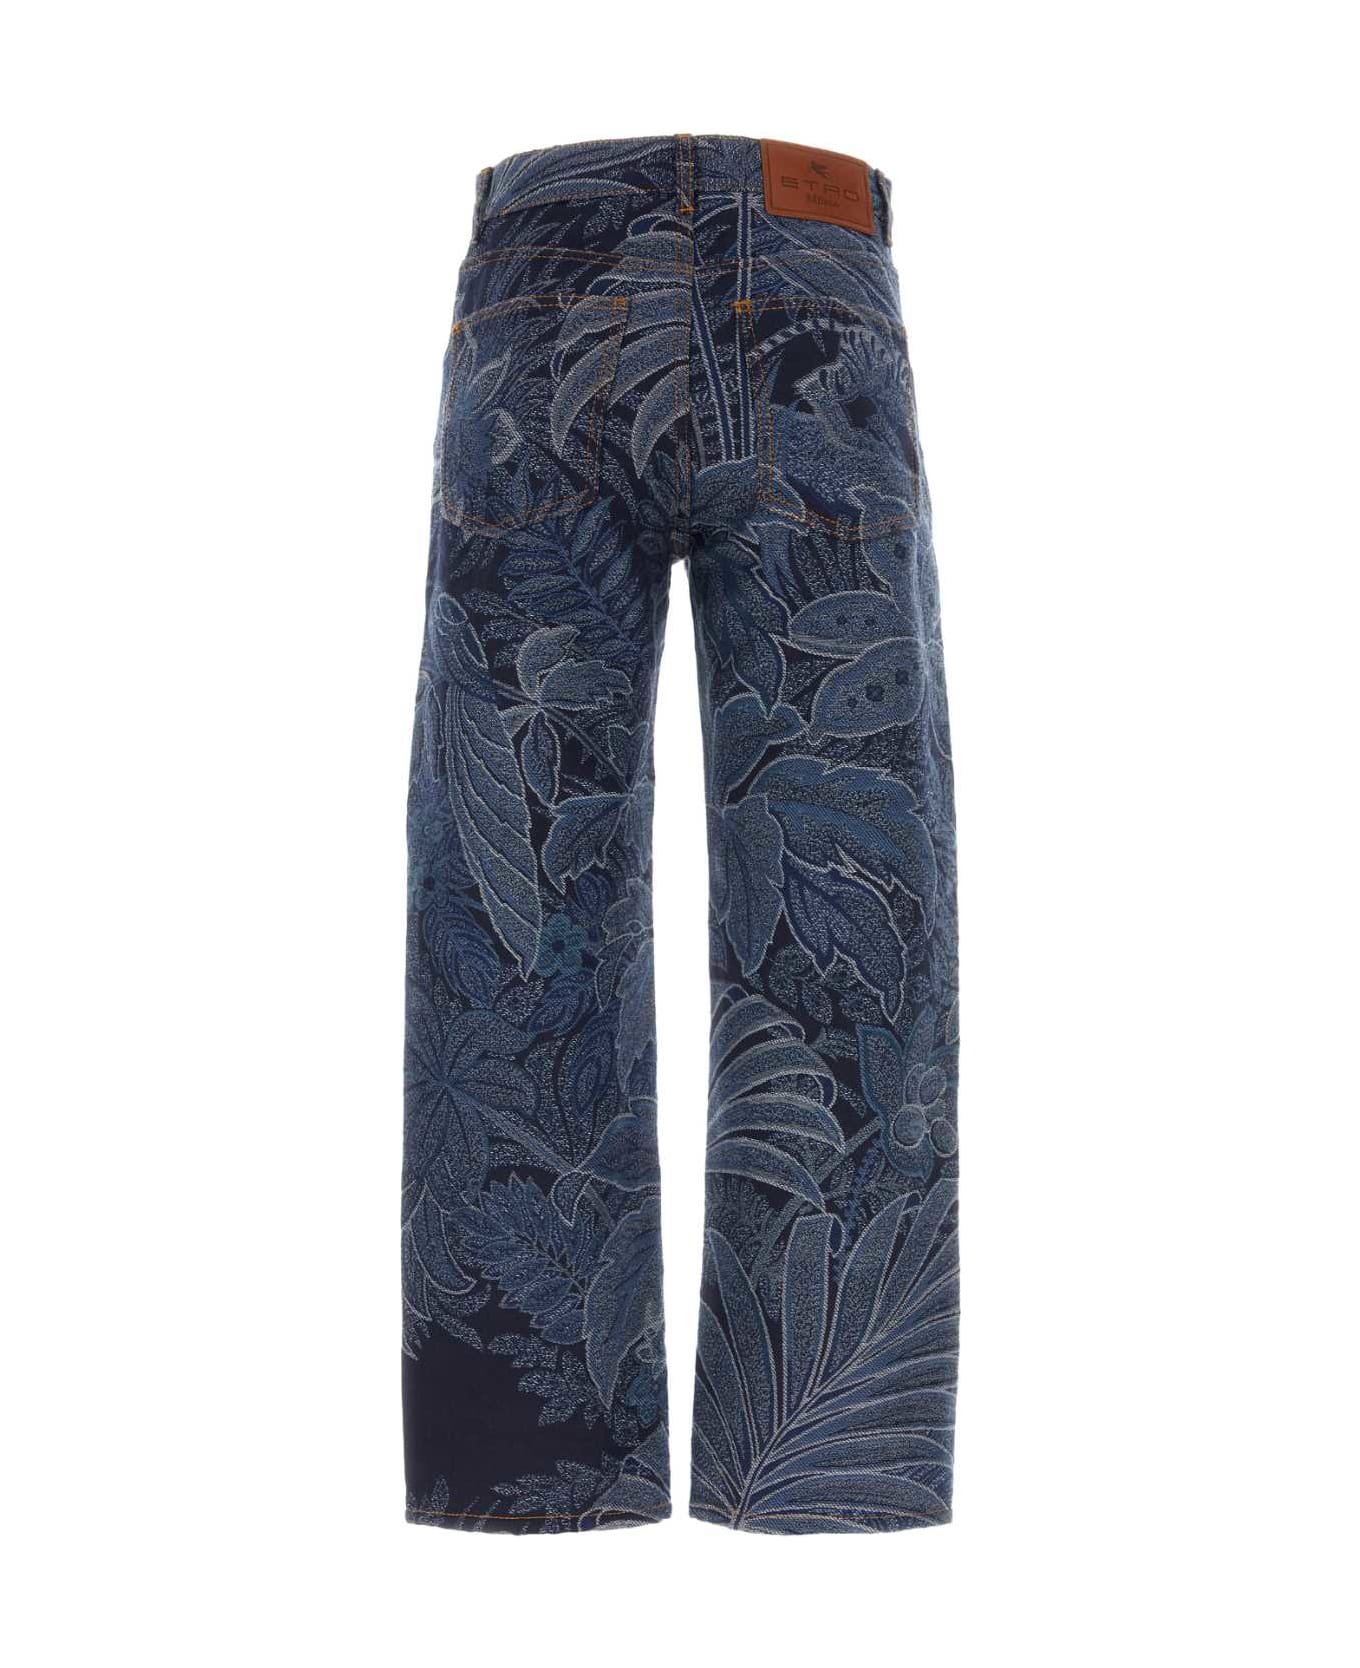 Etro Embroidered Denim Jeans - 250 ボトムス